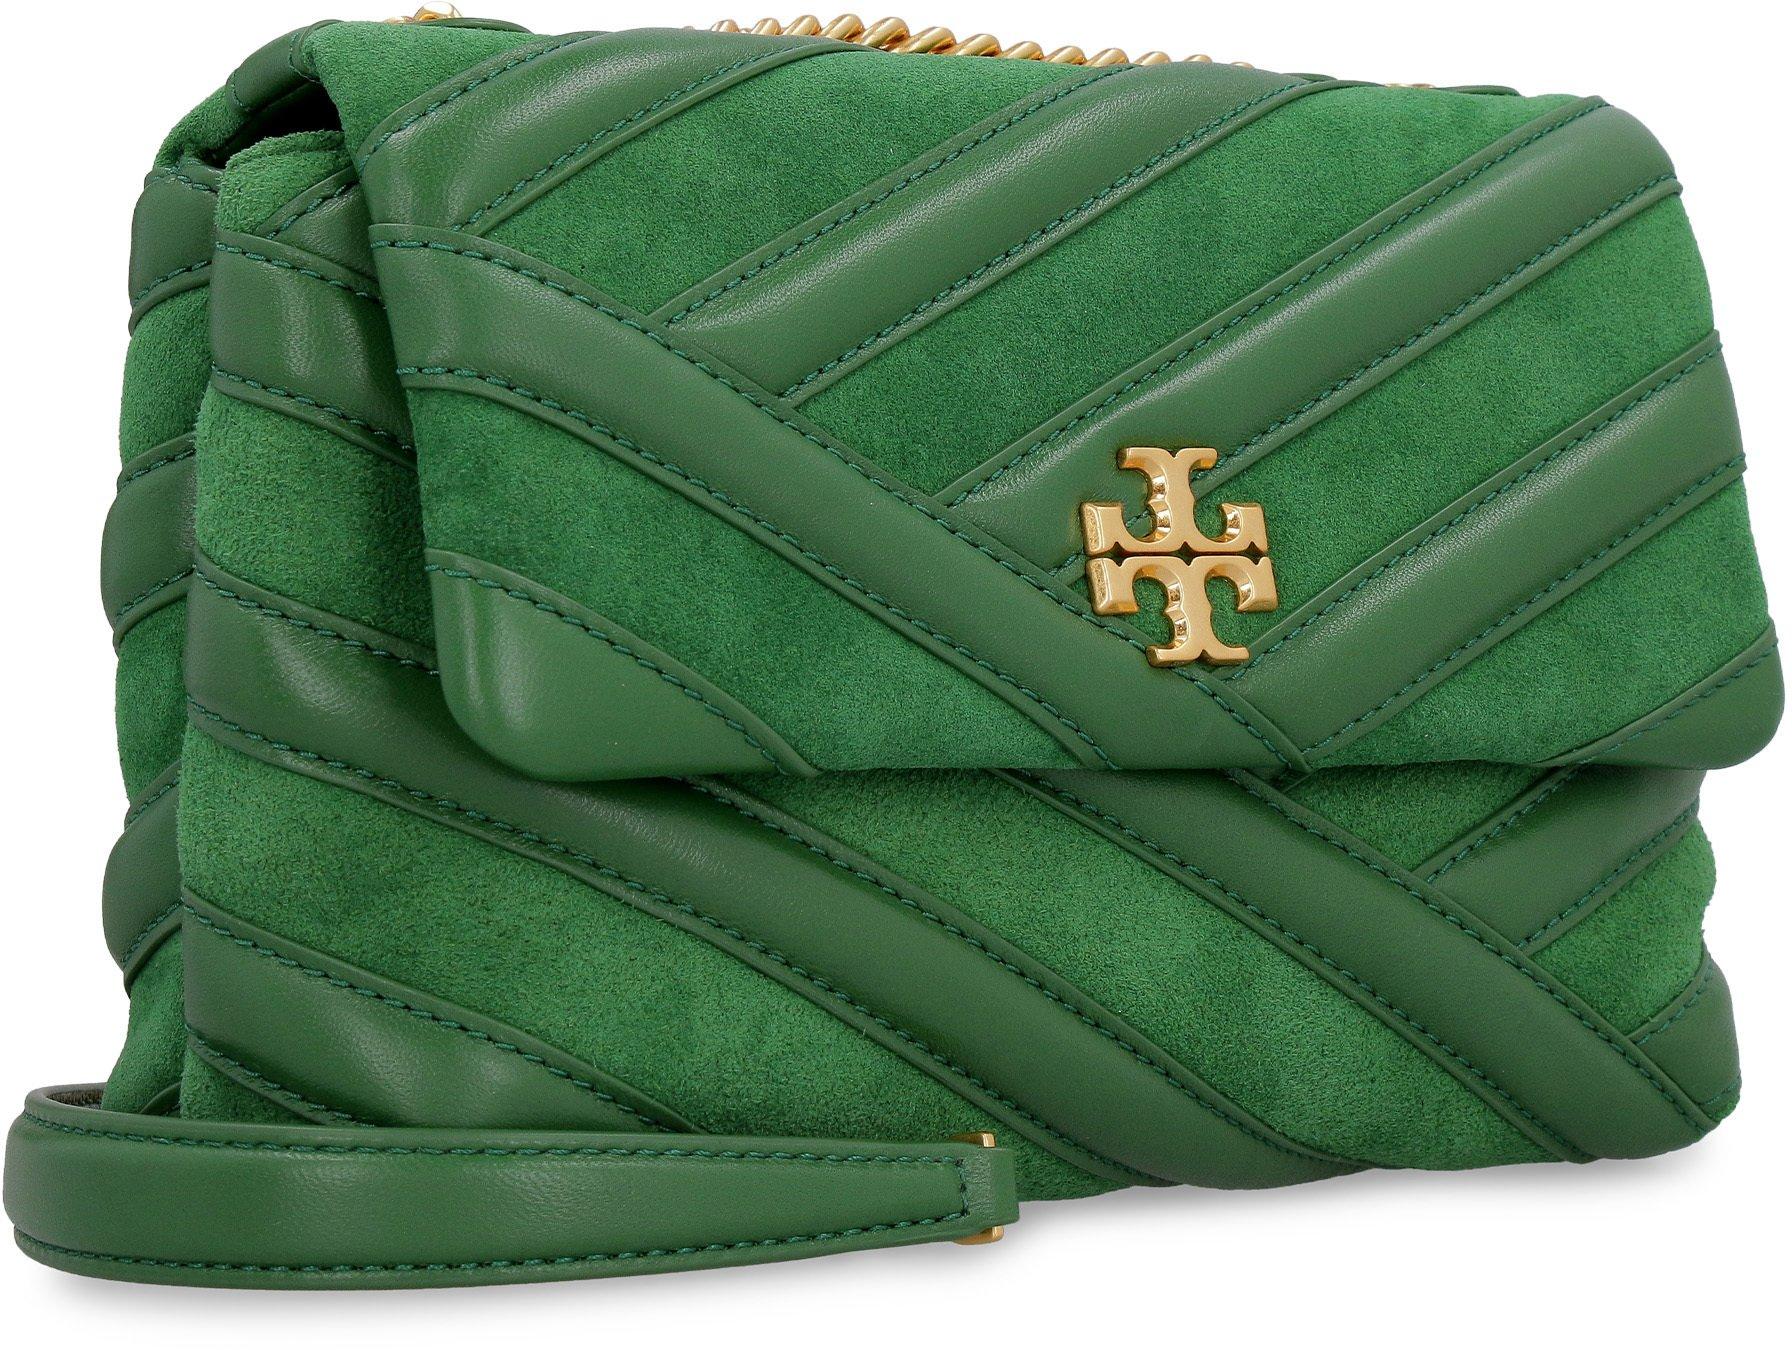 Tory Burch Kira Leather And Suede Bag in Green | Lyst